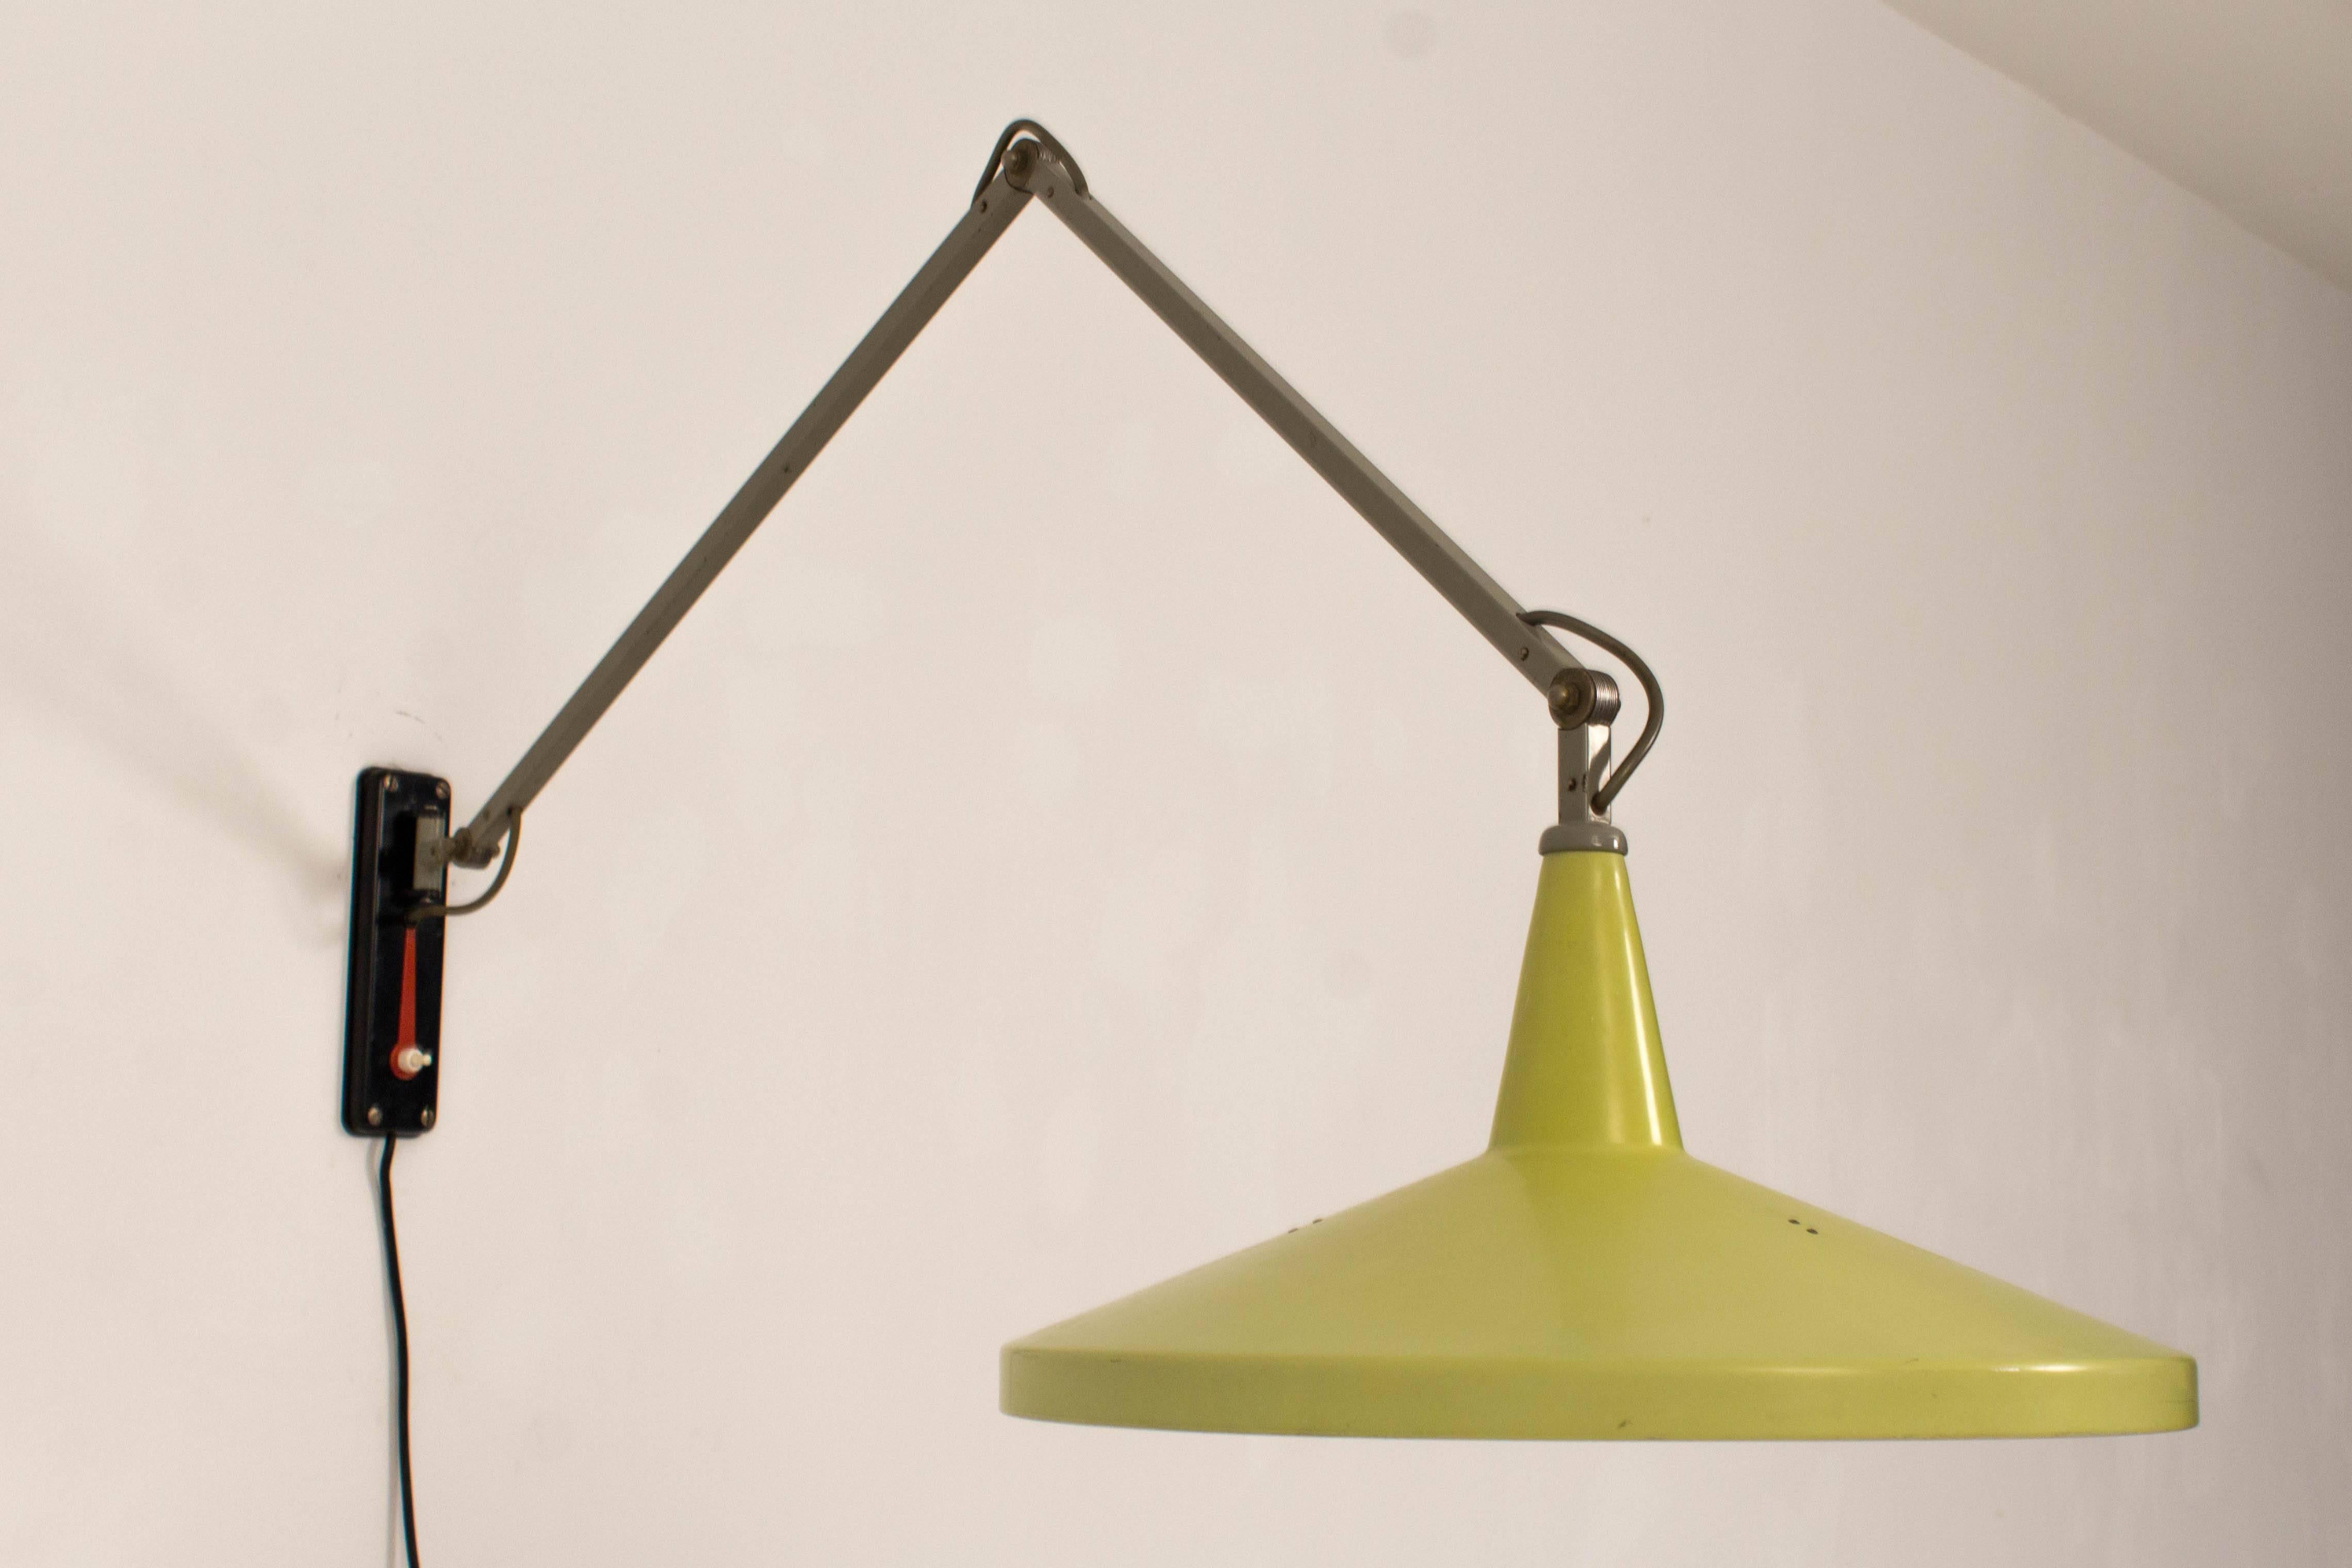 Rare lime color Panama wall lamp by Wim Rietveld for Gispen.
This adjustable metal wall lamp has the original diffuser.
The red metal ornament can be used as a tool for 
repositioning the lamp.
In good original condition with minor wear